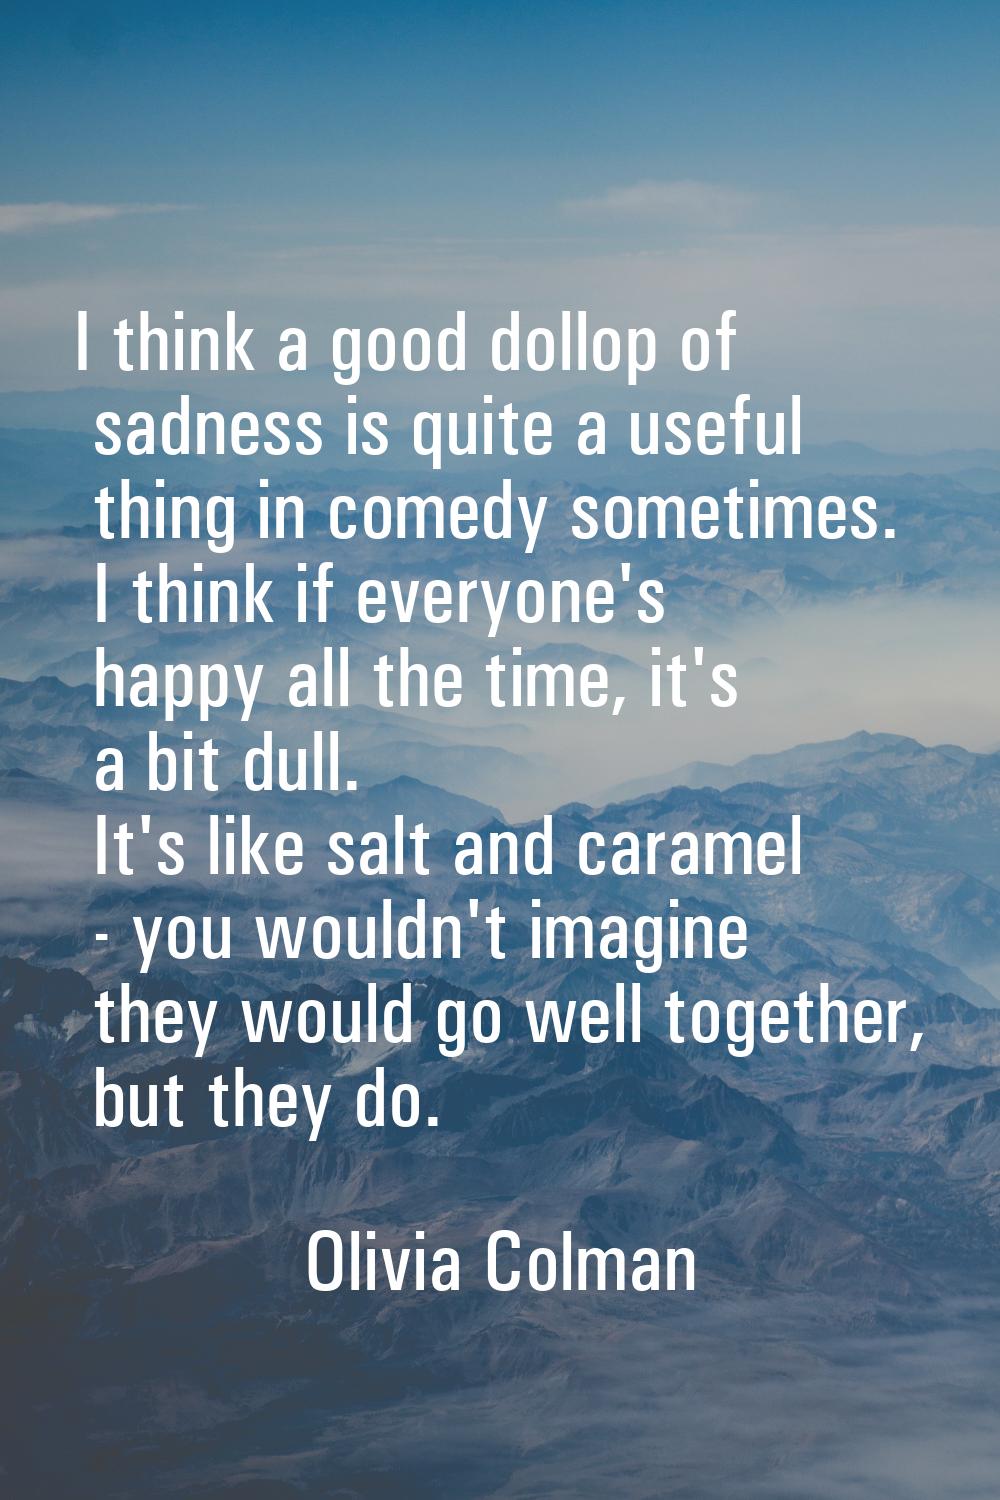 I think a good dollop of sadness is quite a useful thing in comedy sometimes. I think if everyone's